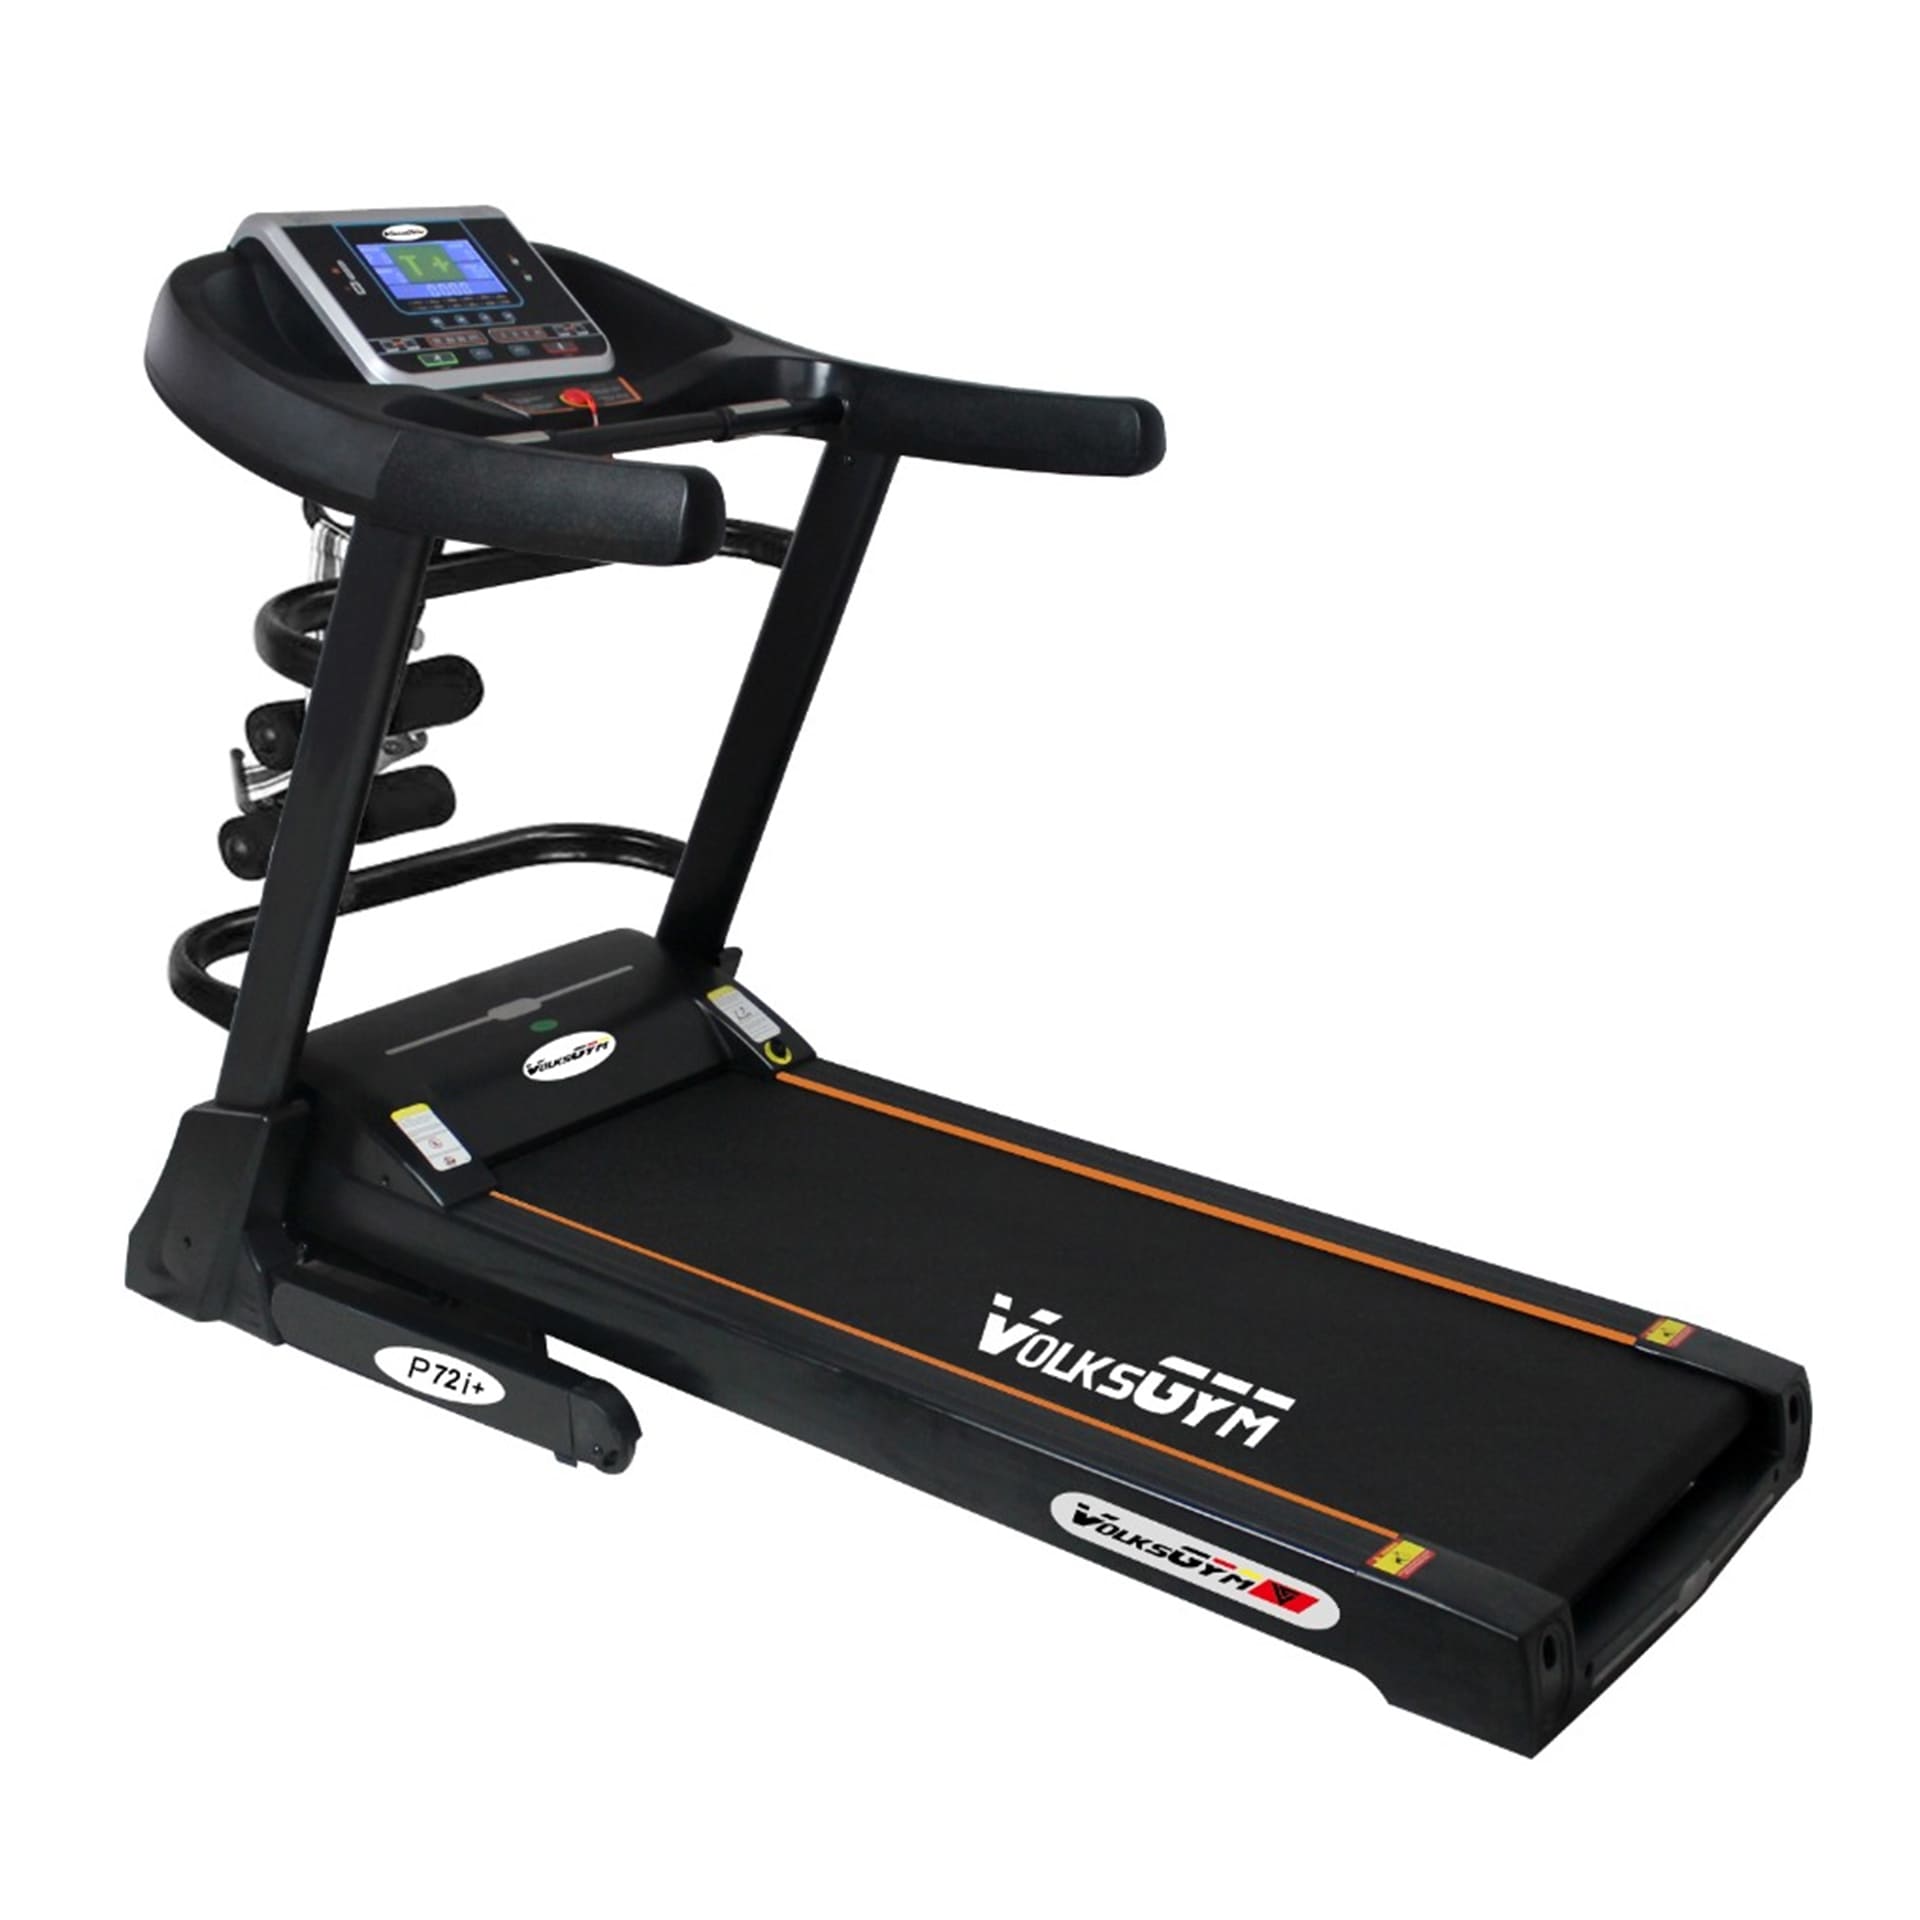 Volksgym P-72i+ Motorized Treadmill with Multi Functions